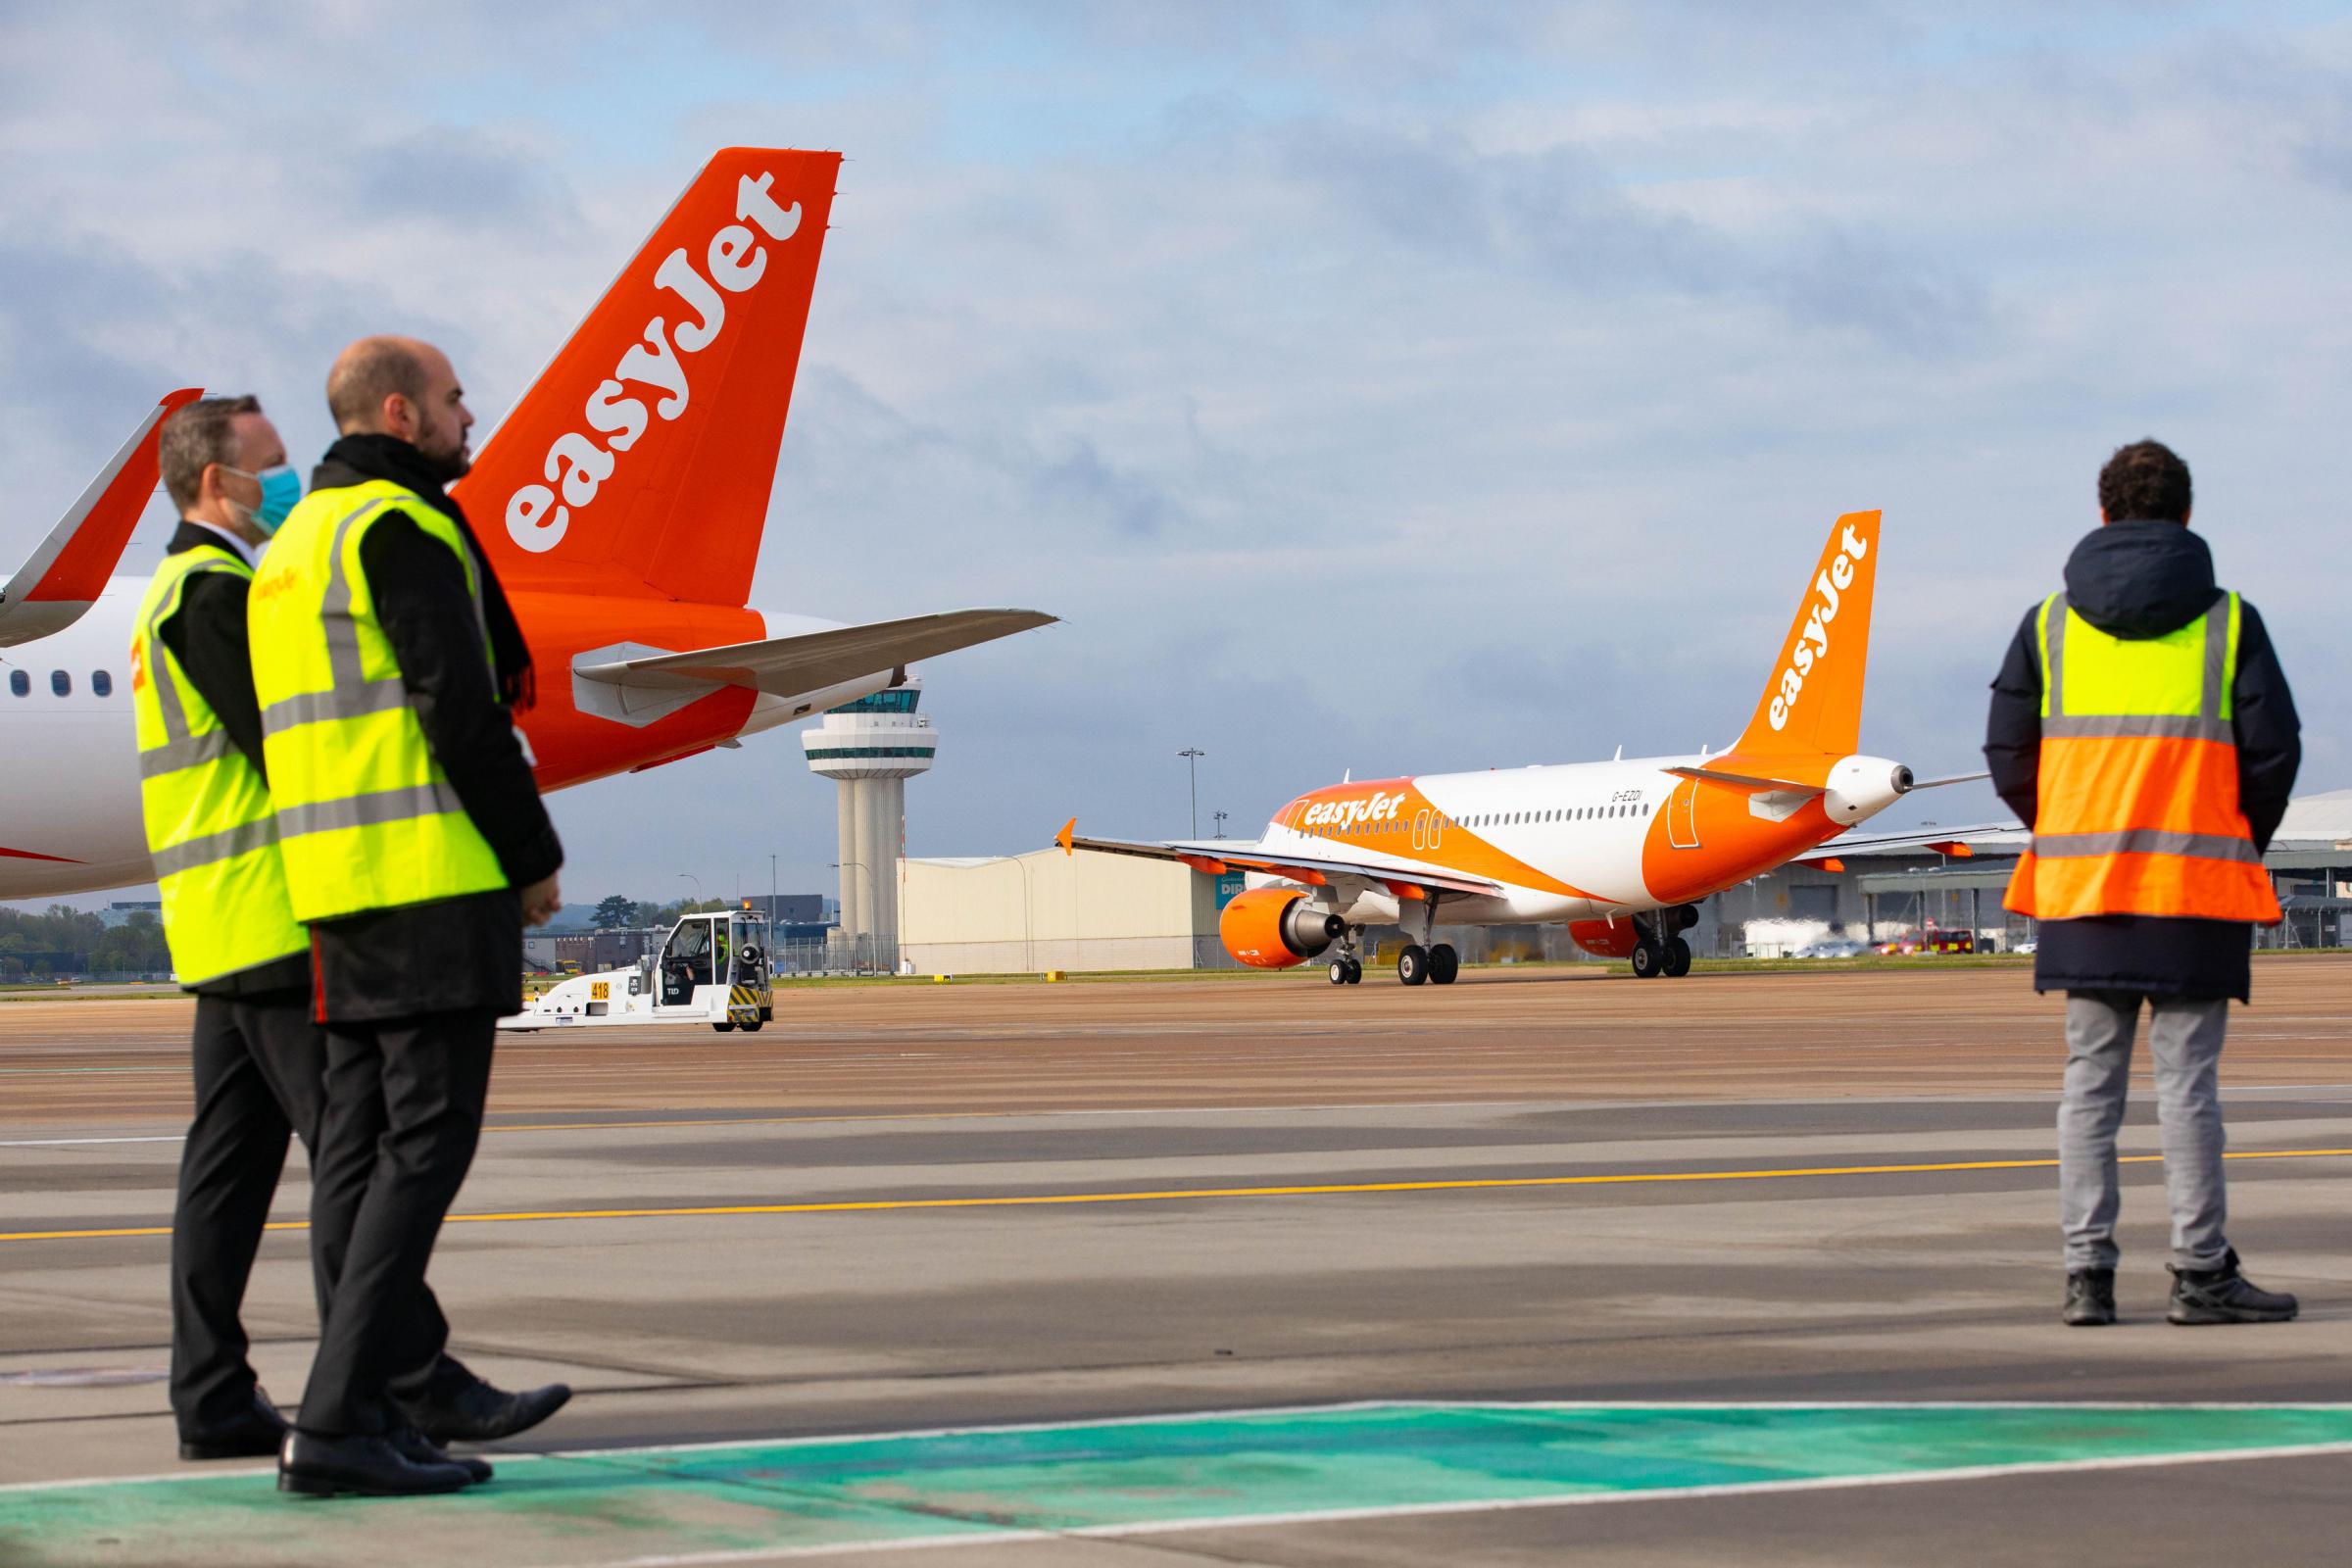 The first holiday and leisure flight pushes off for take-off at Gatwick Airport Picture: David Parry/PA Wire